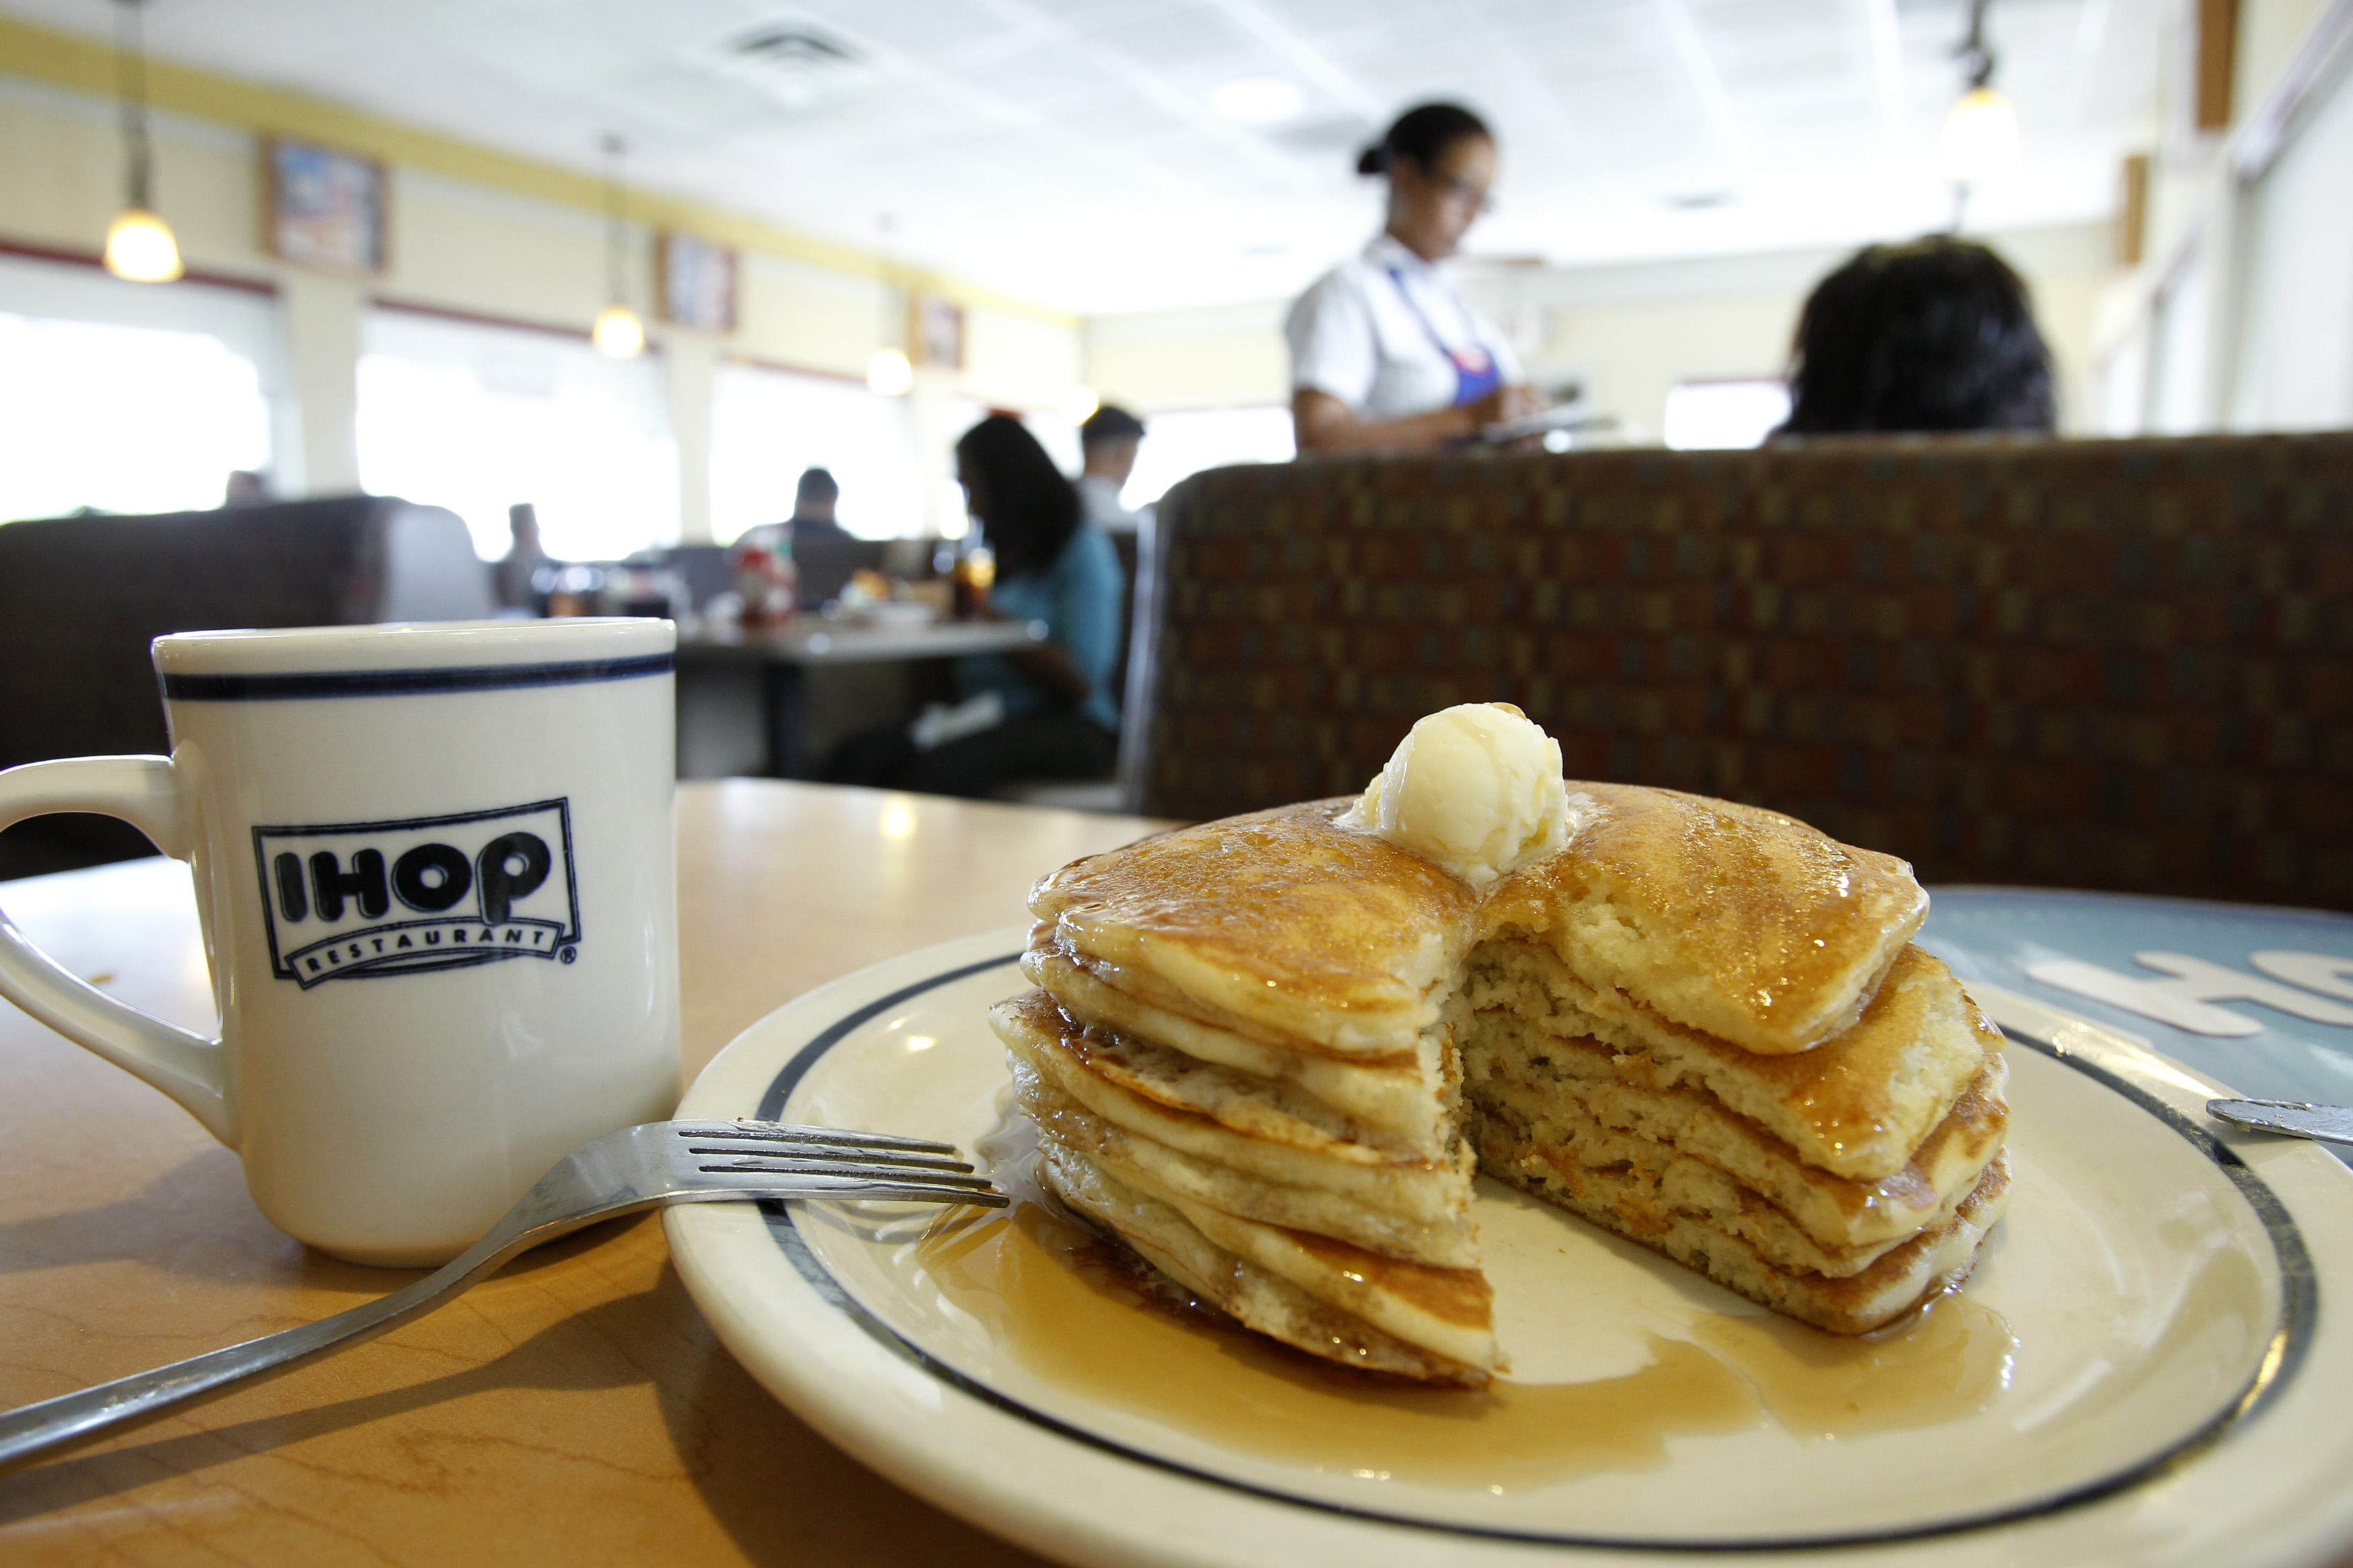 A stack of pancakes are pictured at an IHOP restaurant in Los Angeles